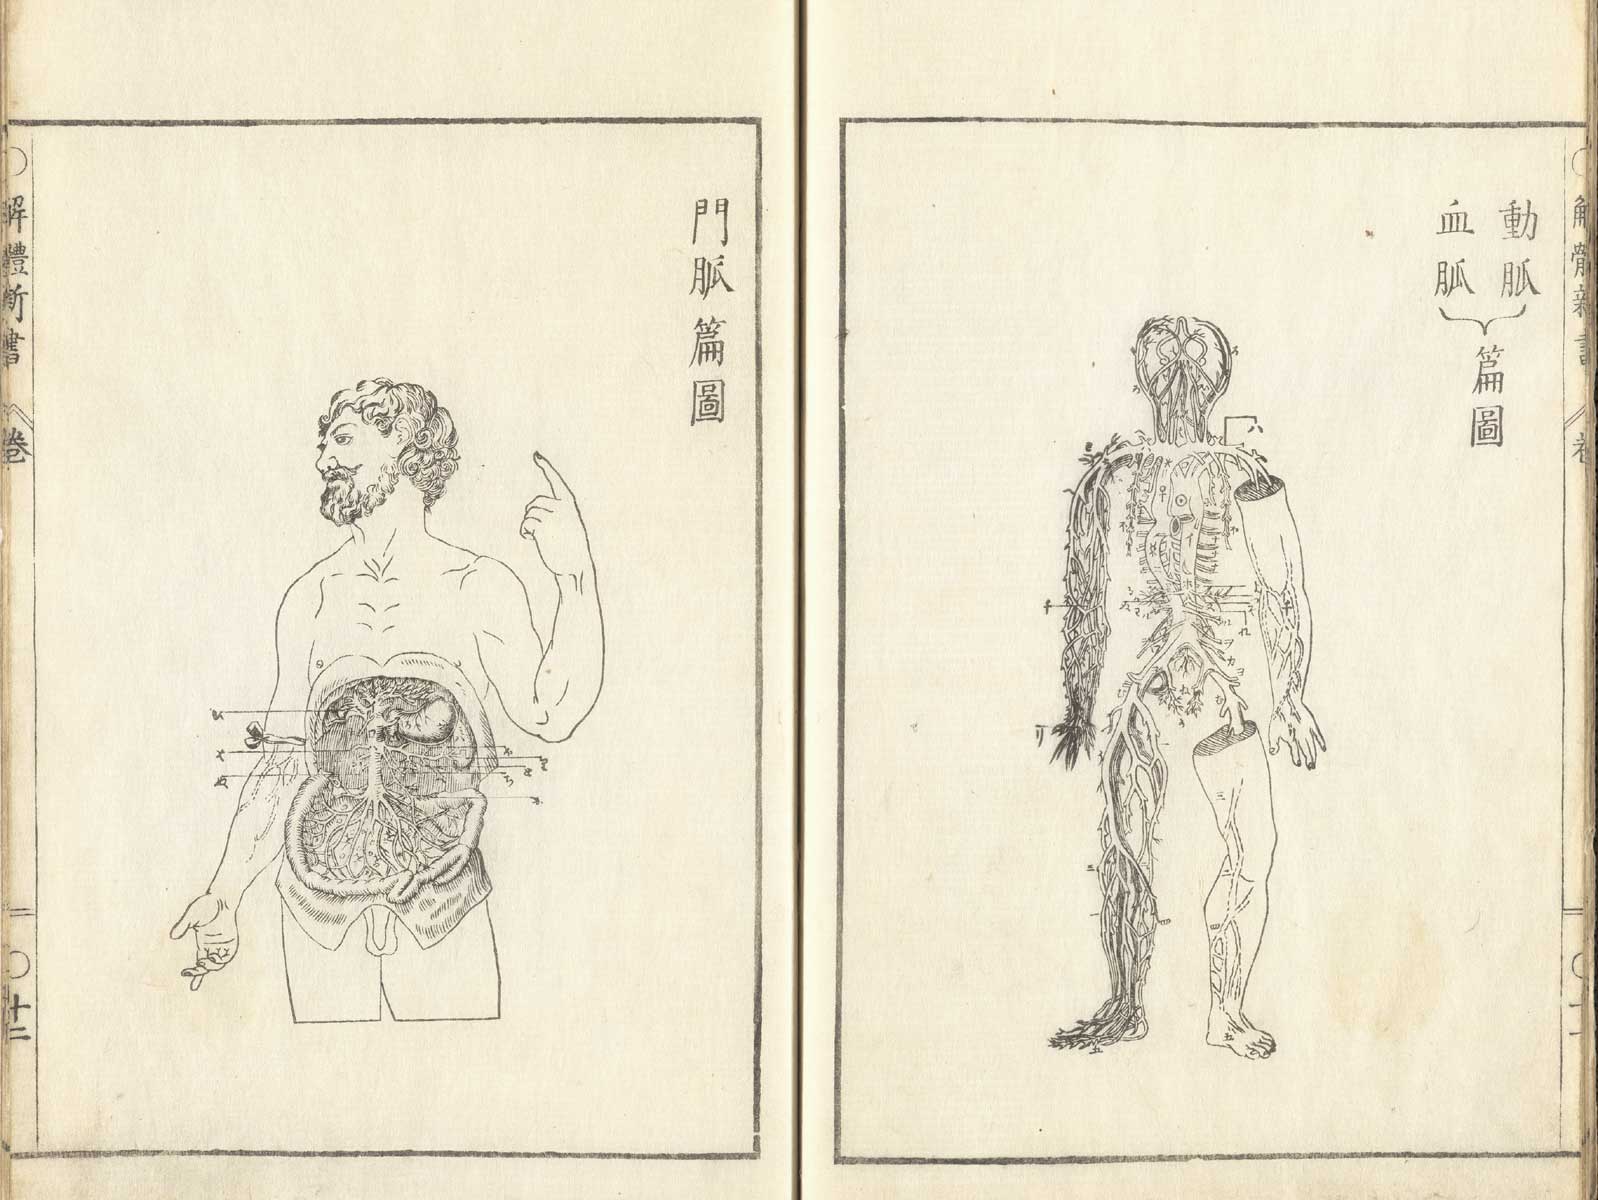 Pages 11 and 12 of Johann Adam Kulmus' Kaitai shinsho. Page 11 is a full length frontal view of the venous system. Page 12 is an illustration of the frontal view of a man with the venous system of the abdominal cavity exposed.